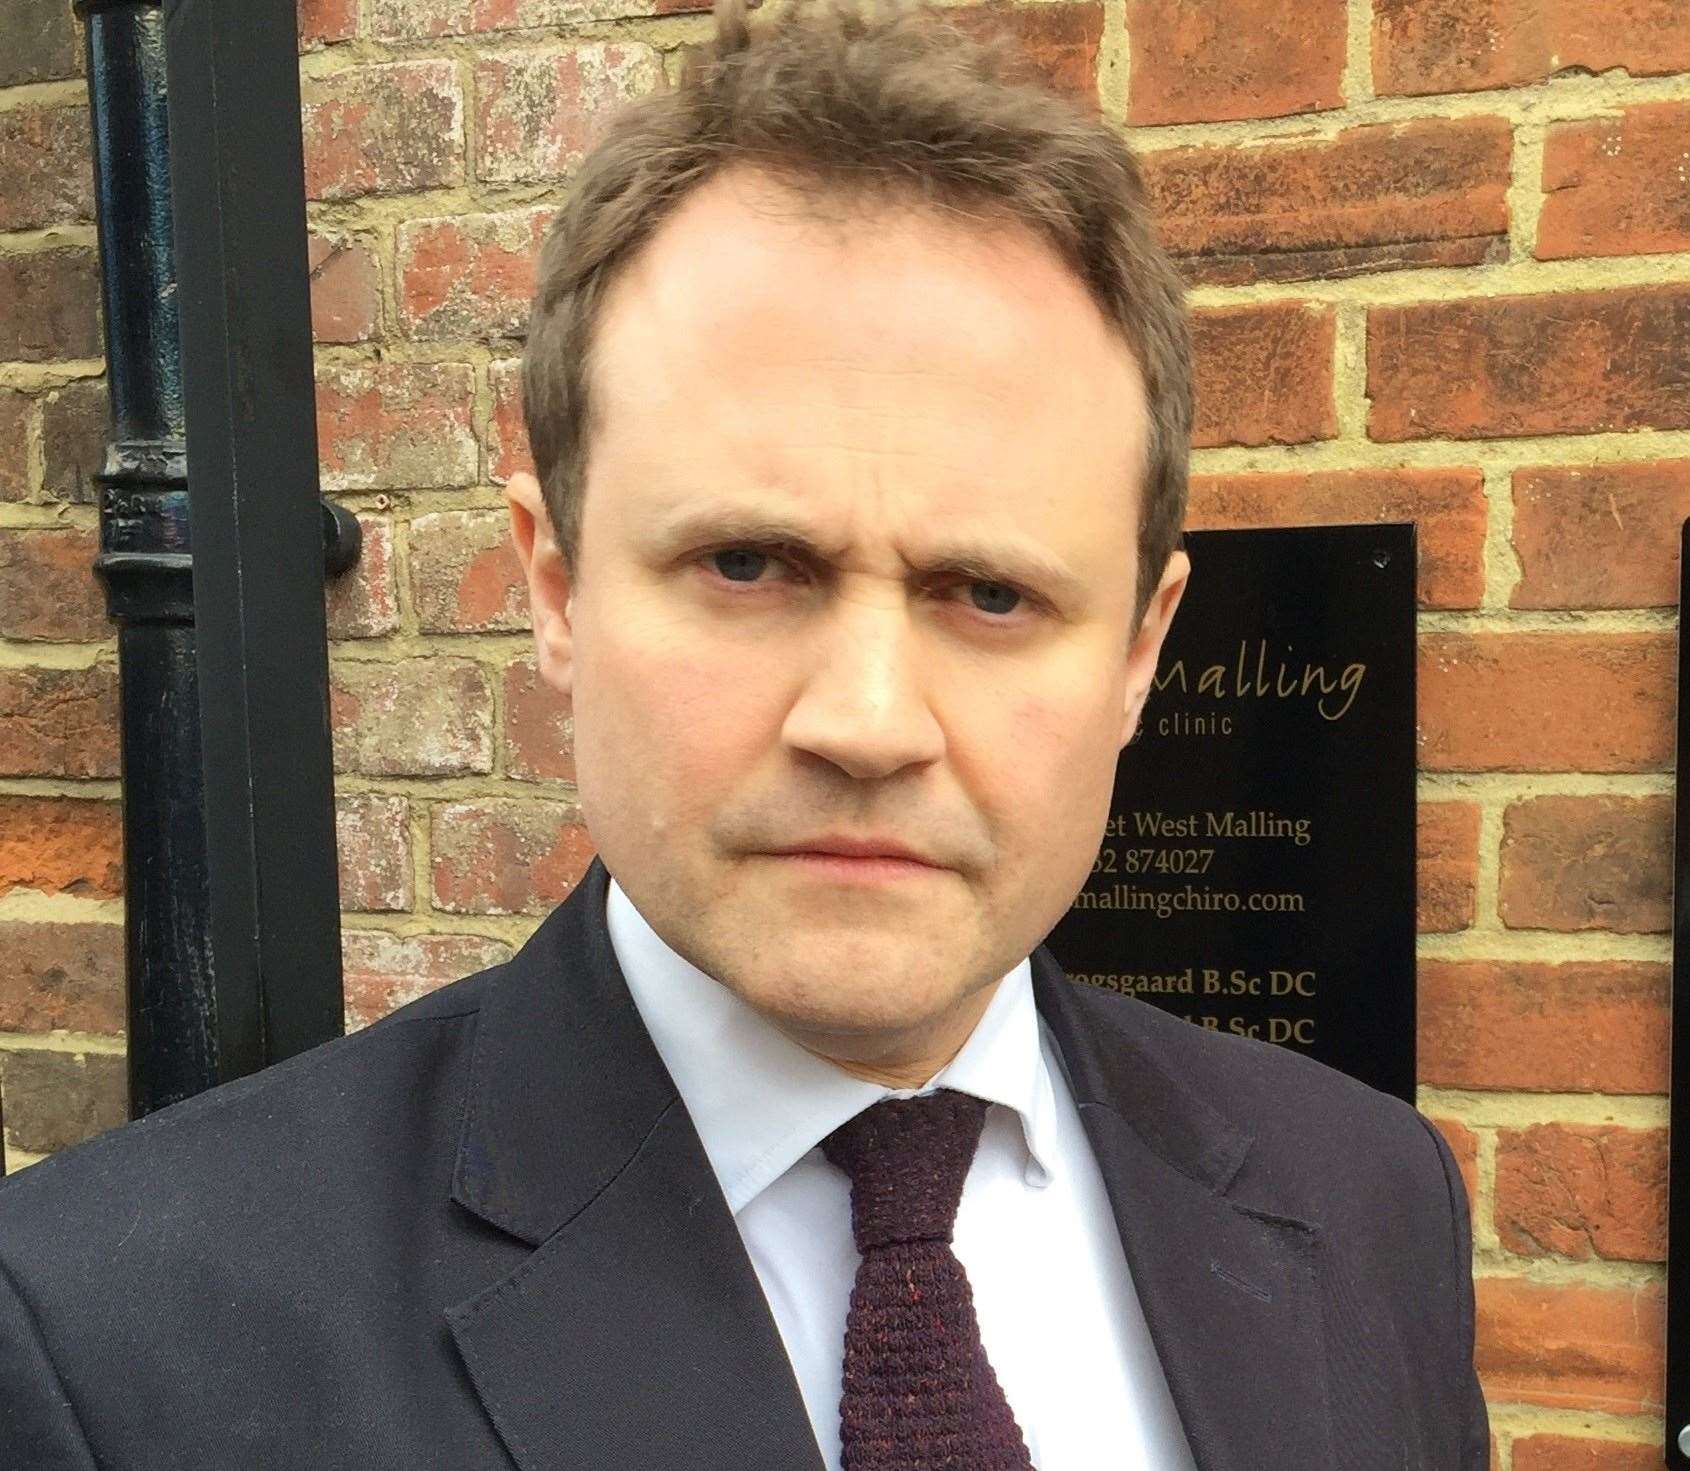 Tom Tugendhat: "This can't go on."